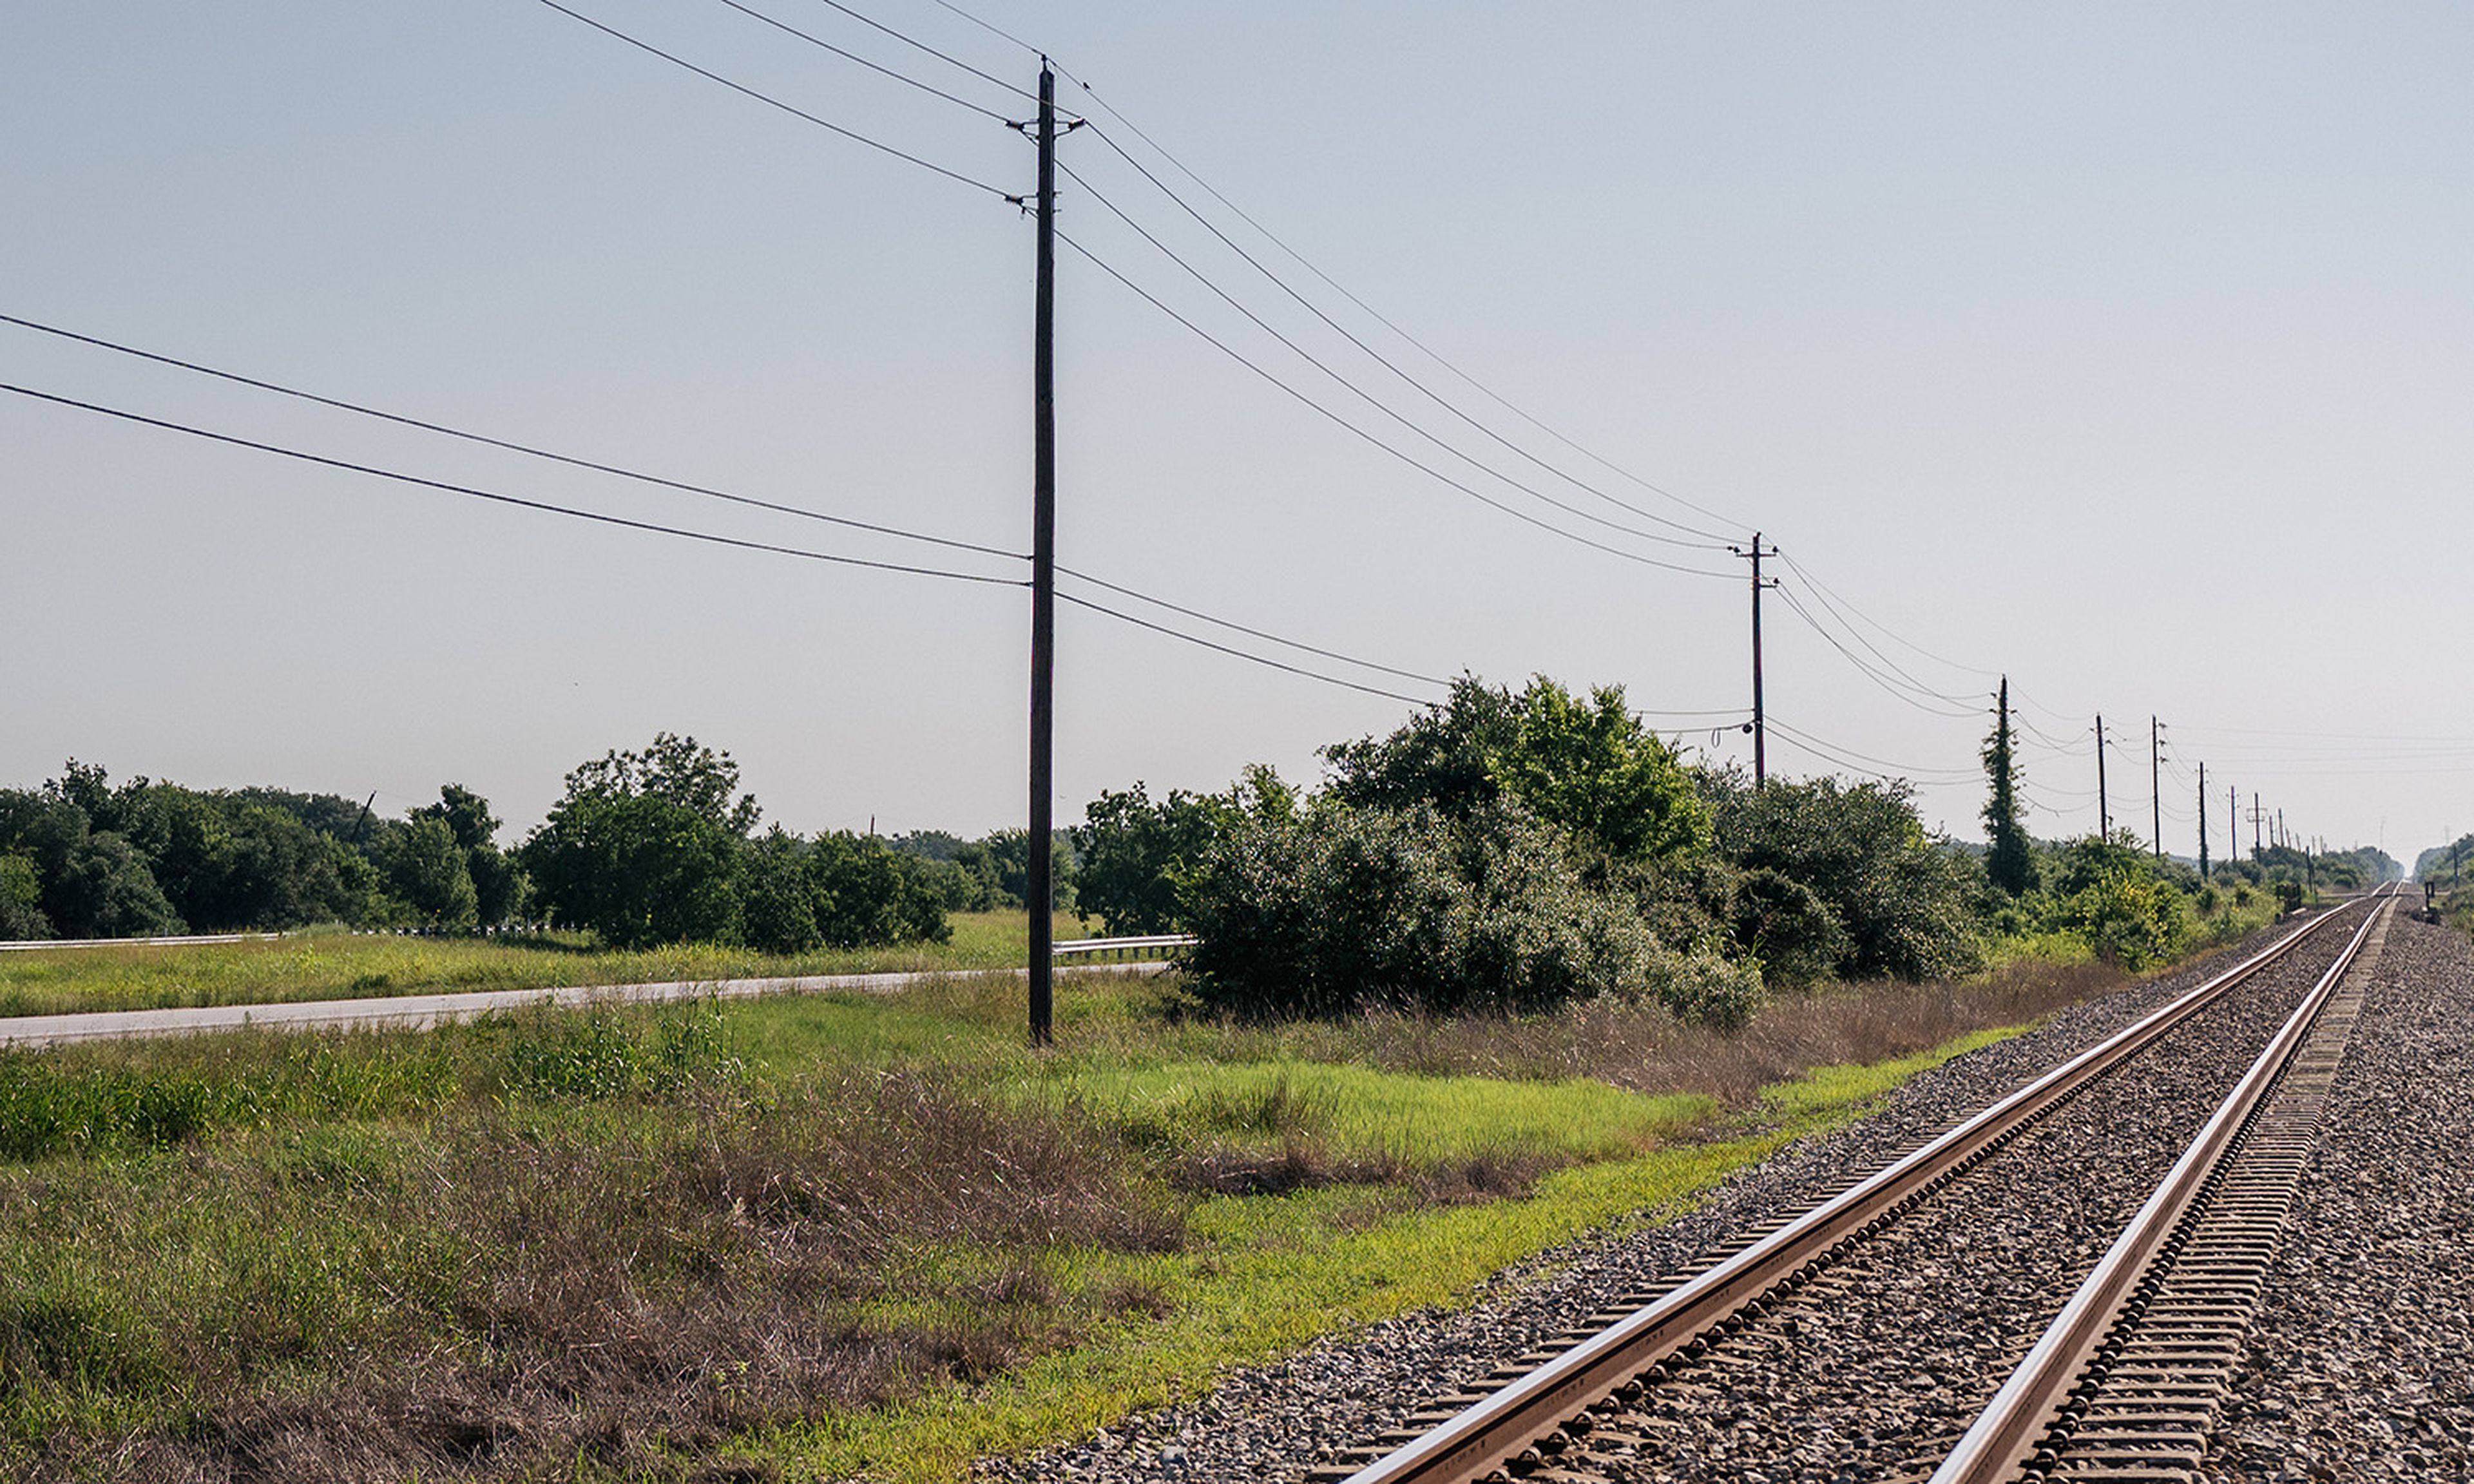 Power-lines are shown on June 15, 2021, in Ganado, Texas. (Photo by Brandon Bell/Getty Images)